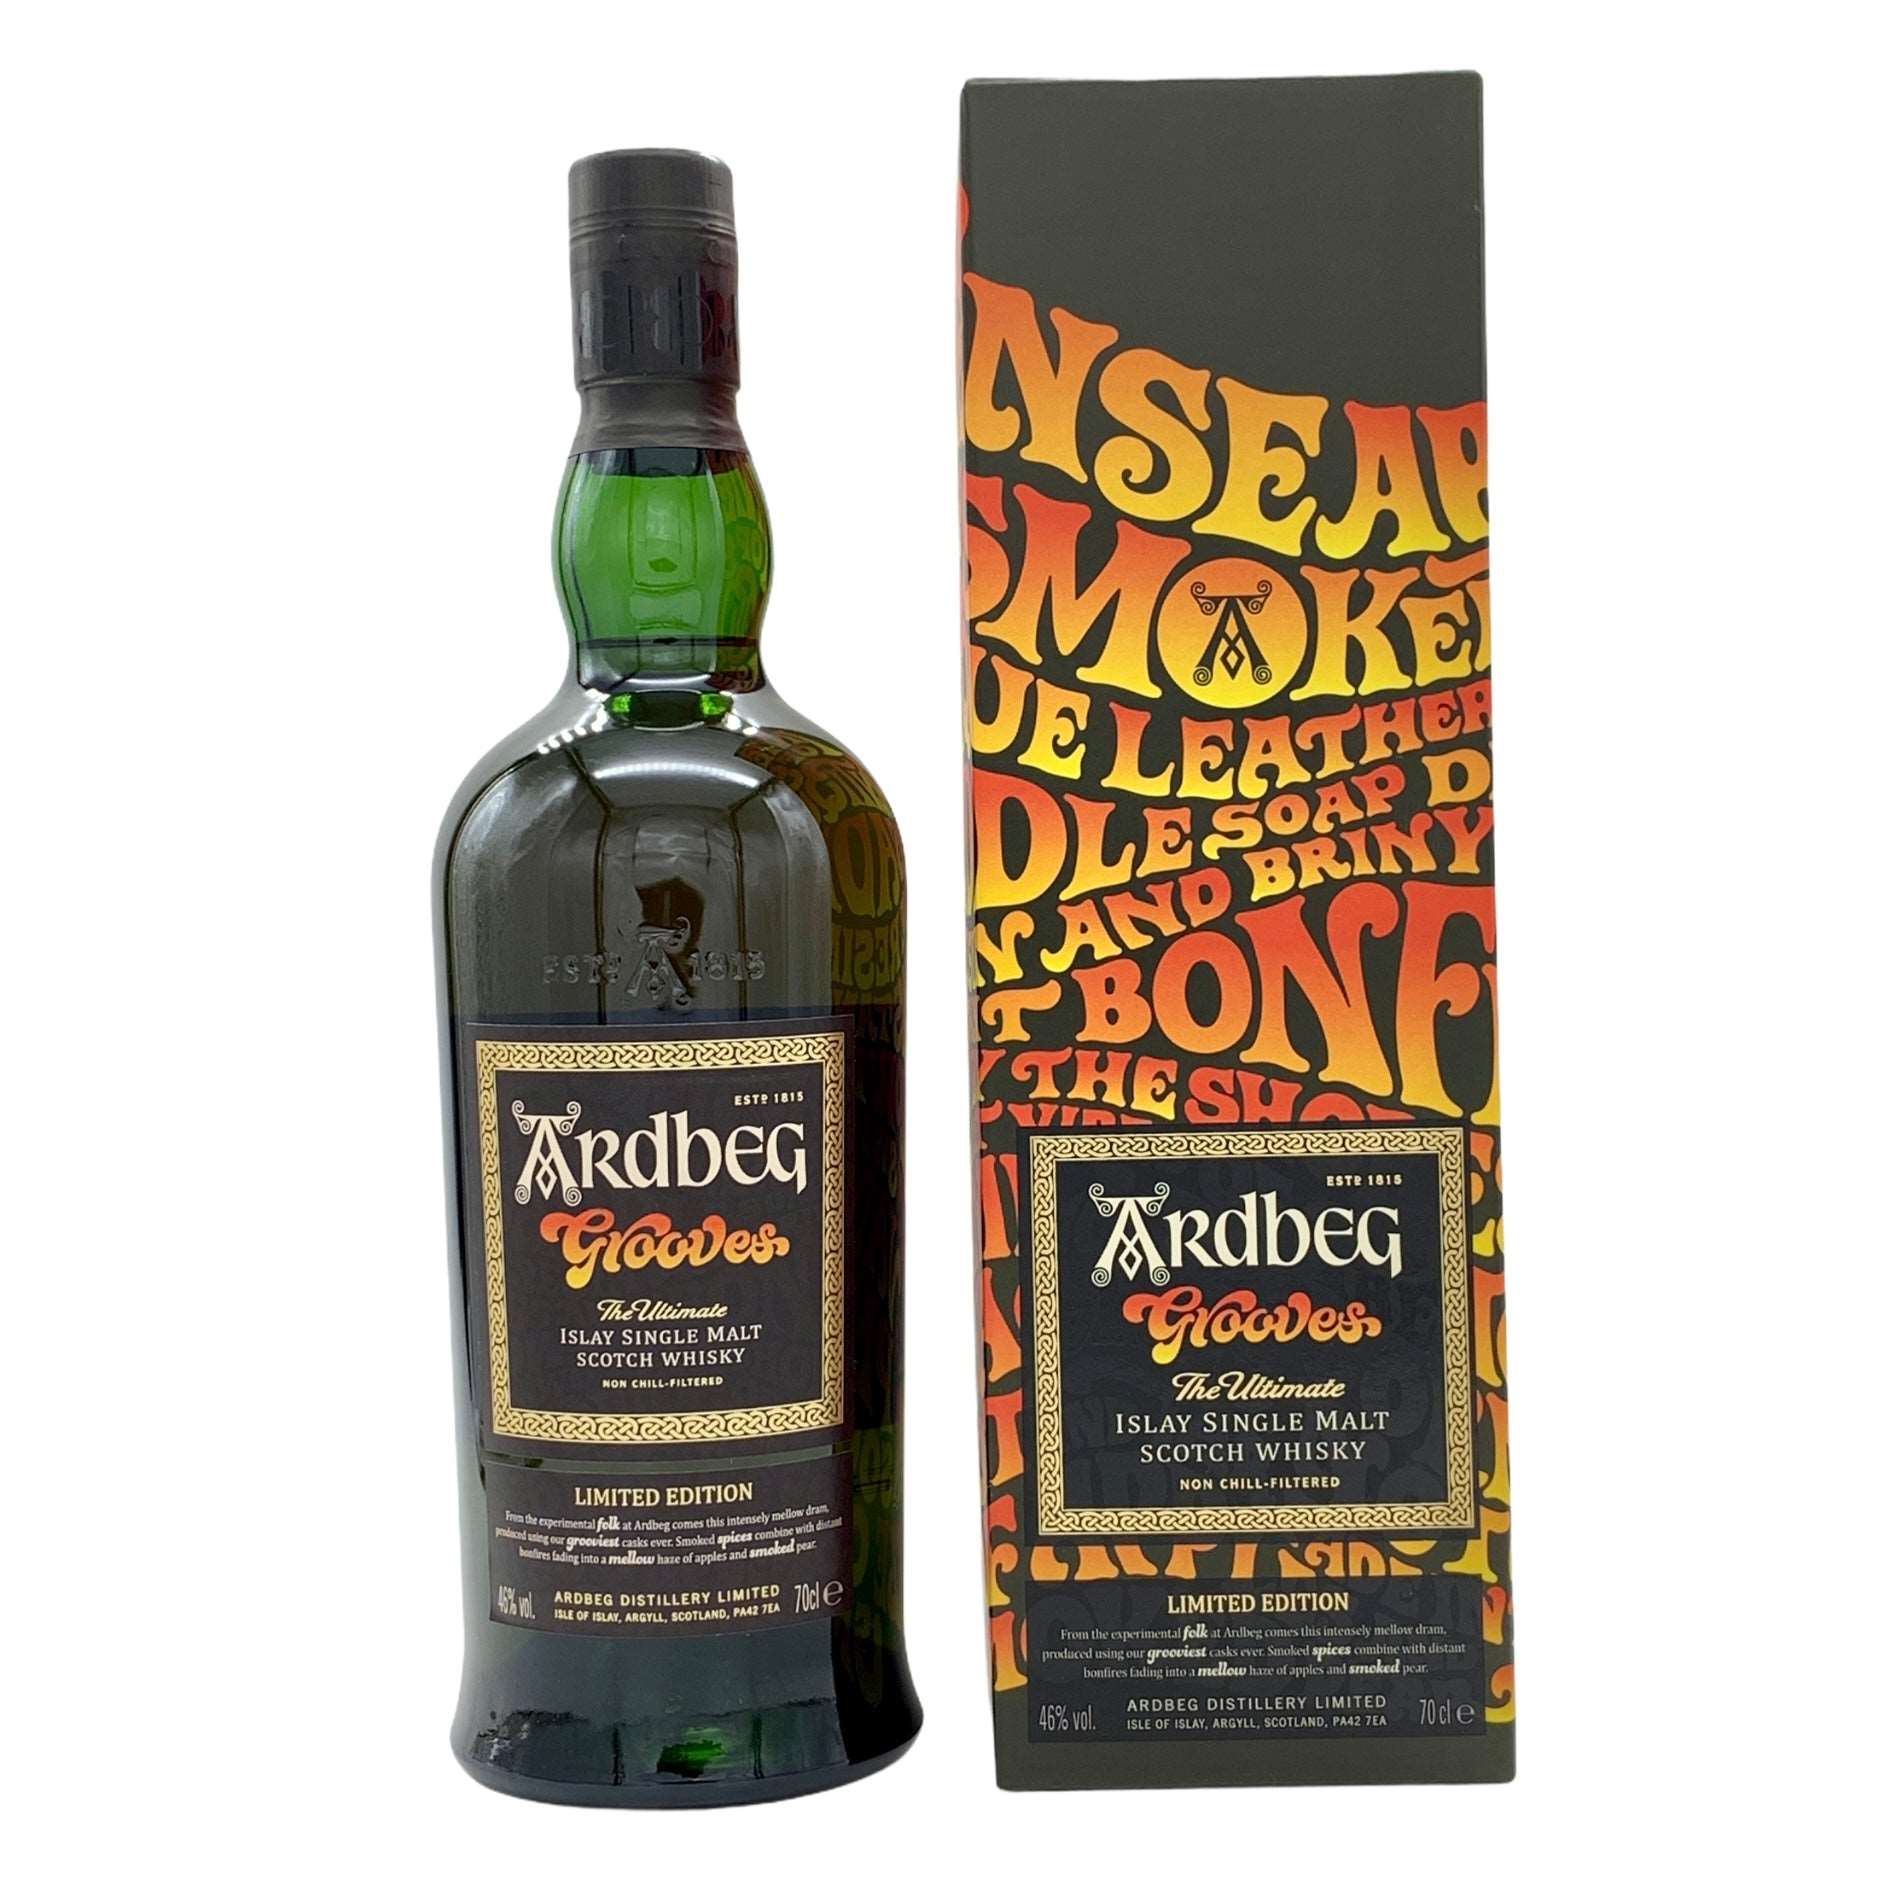 Ardbeg | Grooves | 2018 Committee Release | 0,7l | 46%GET A BOTTLE